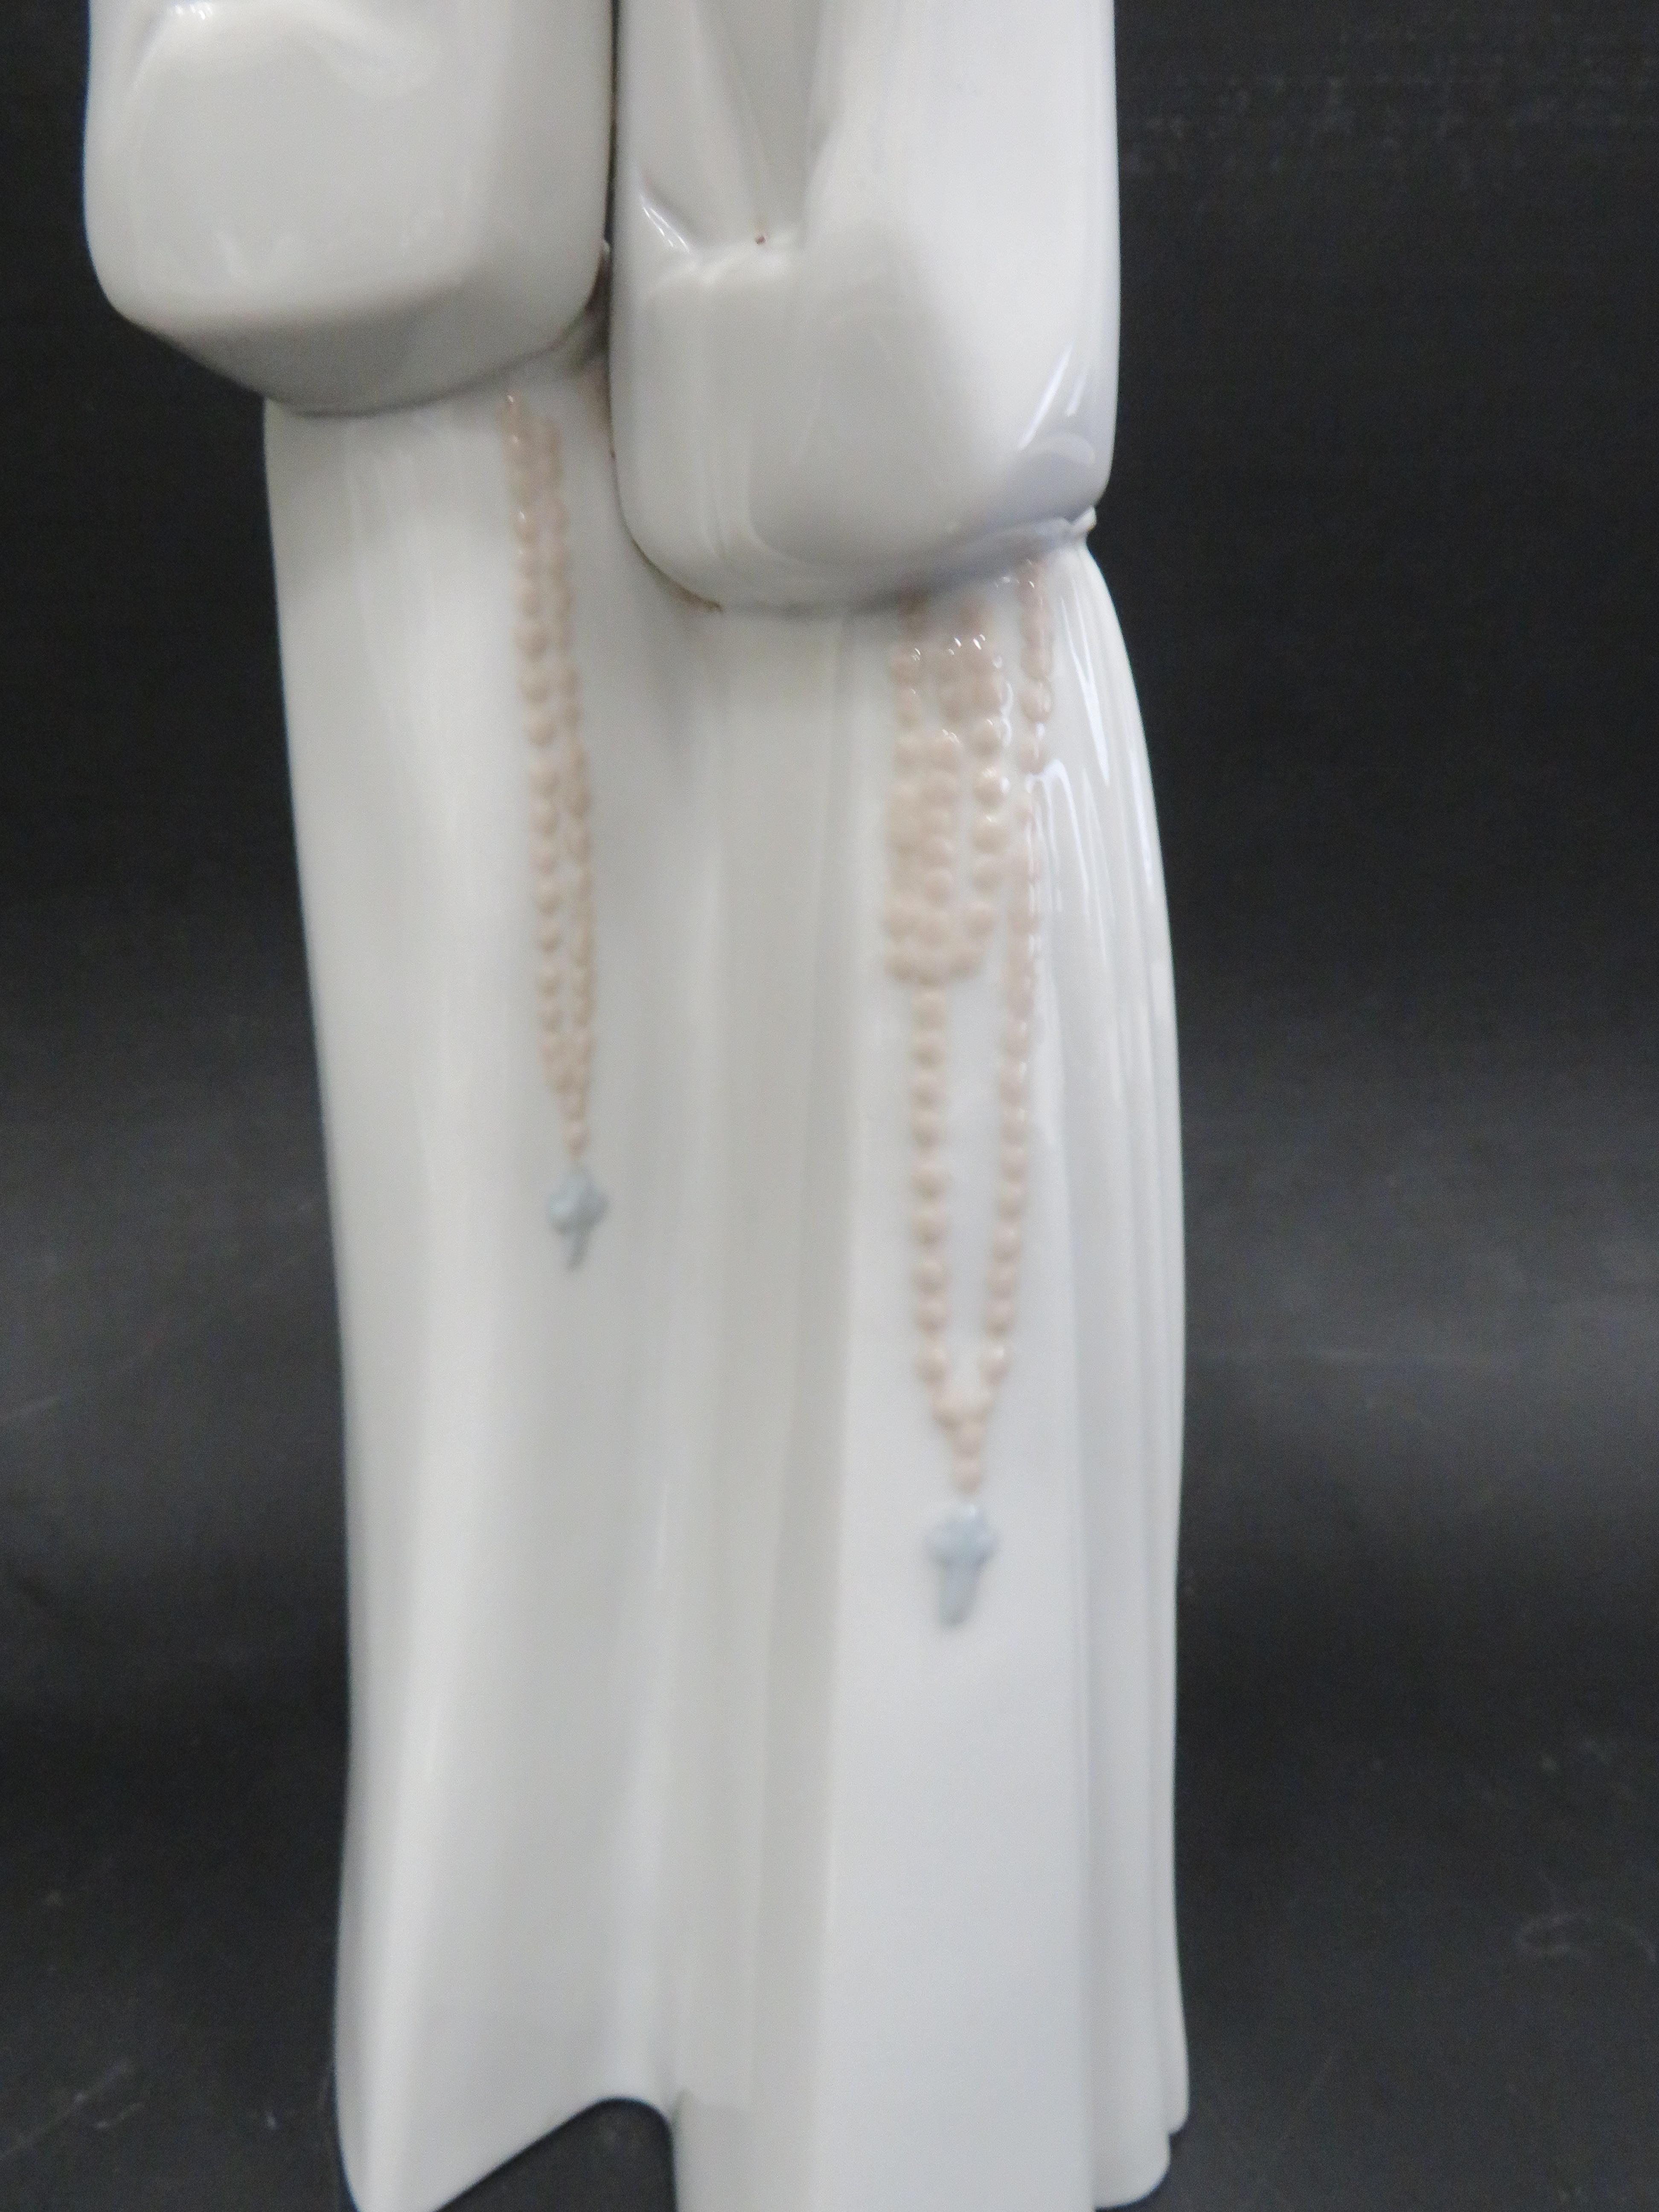 Lladro Figurine 'Two Nuns' 4611 in excellent condition. Measures approx 12 inches tall. See photos - Image 5 of 6